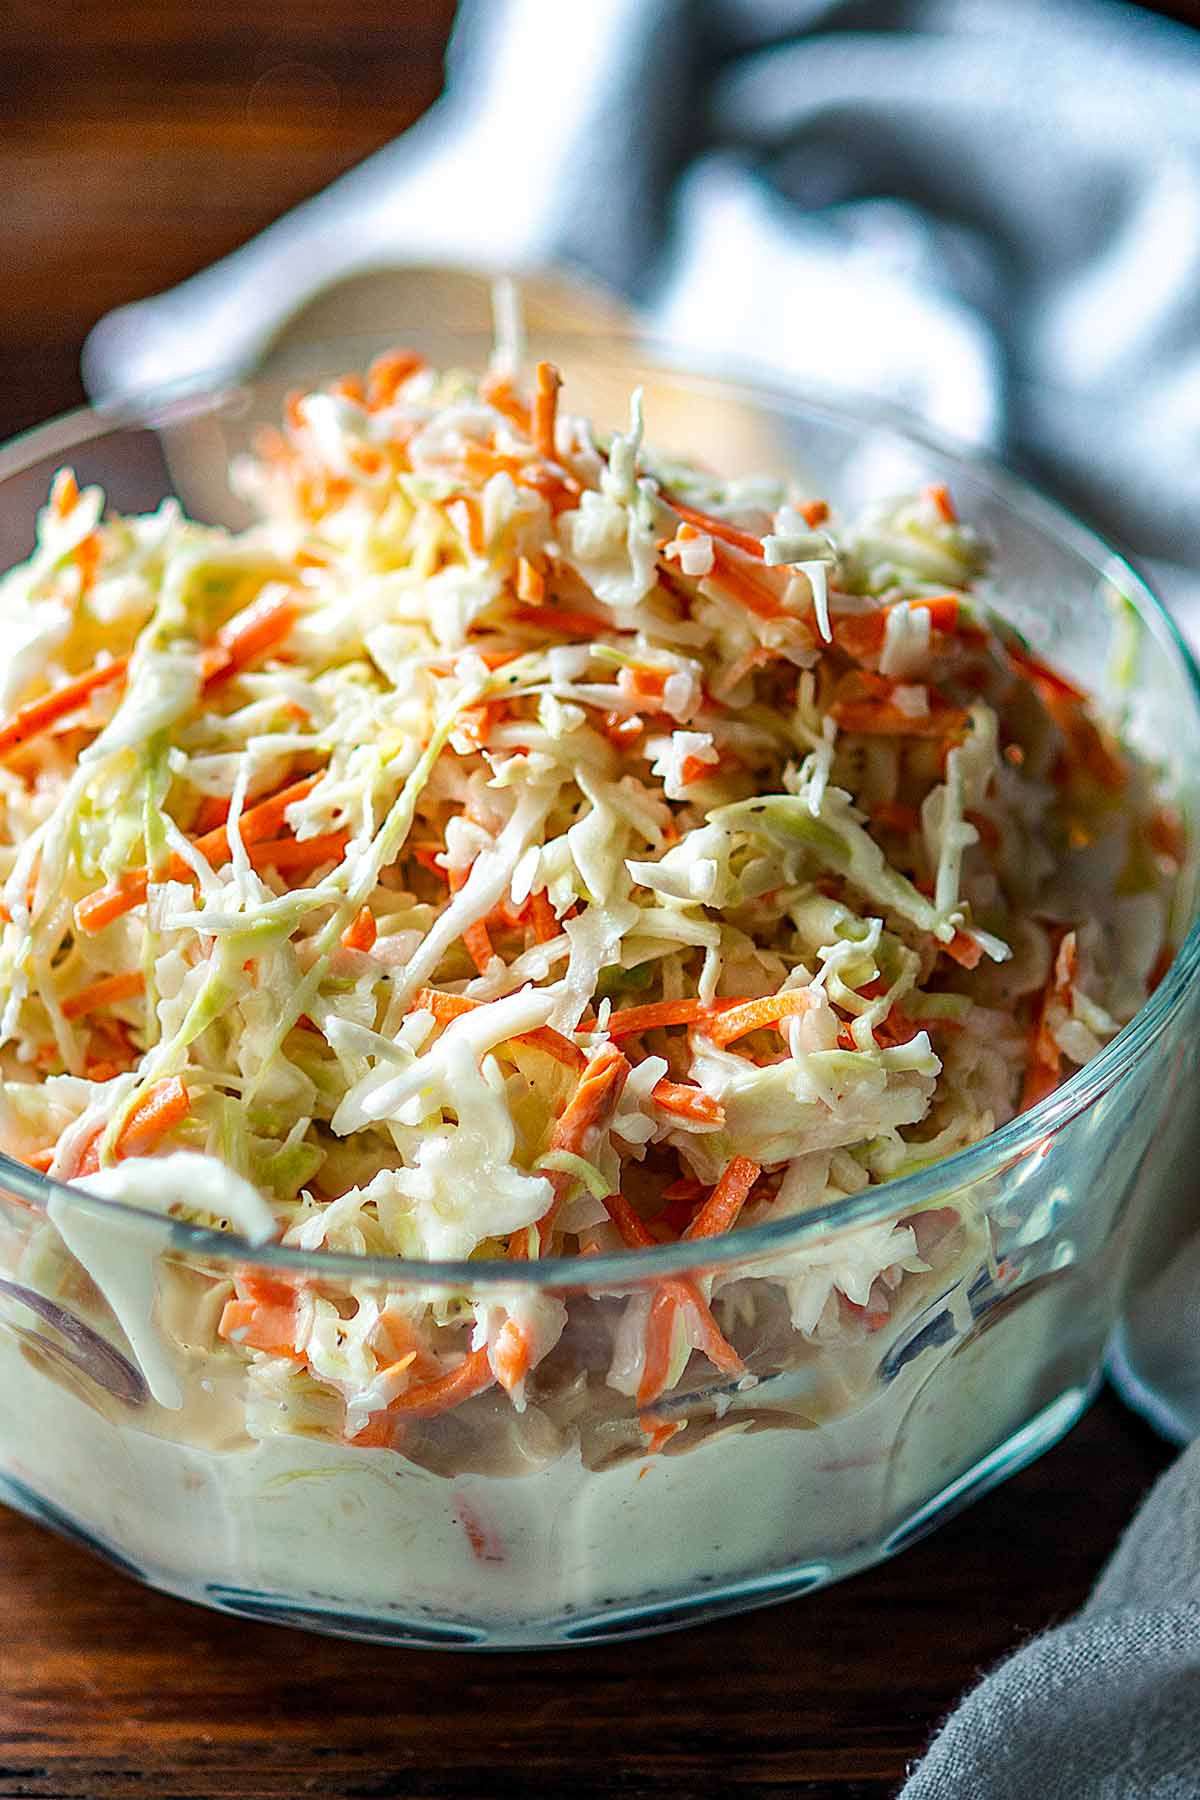 Coleslaw served in a clear serving dish.